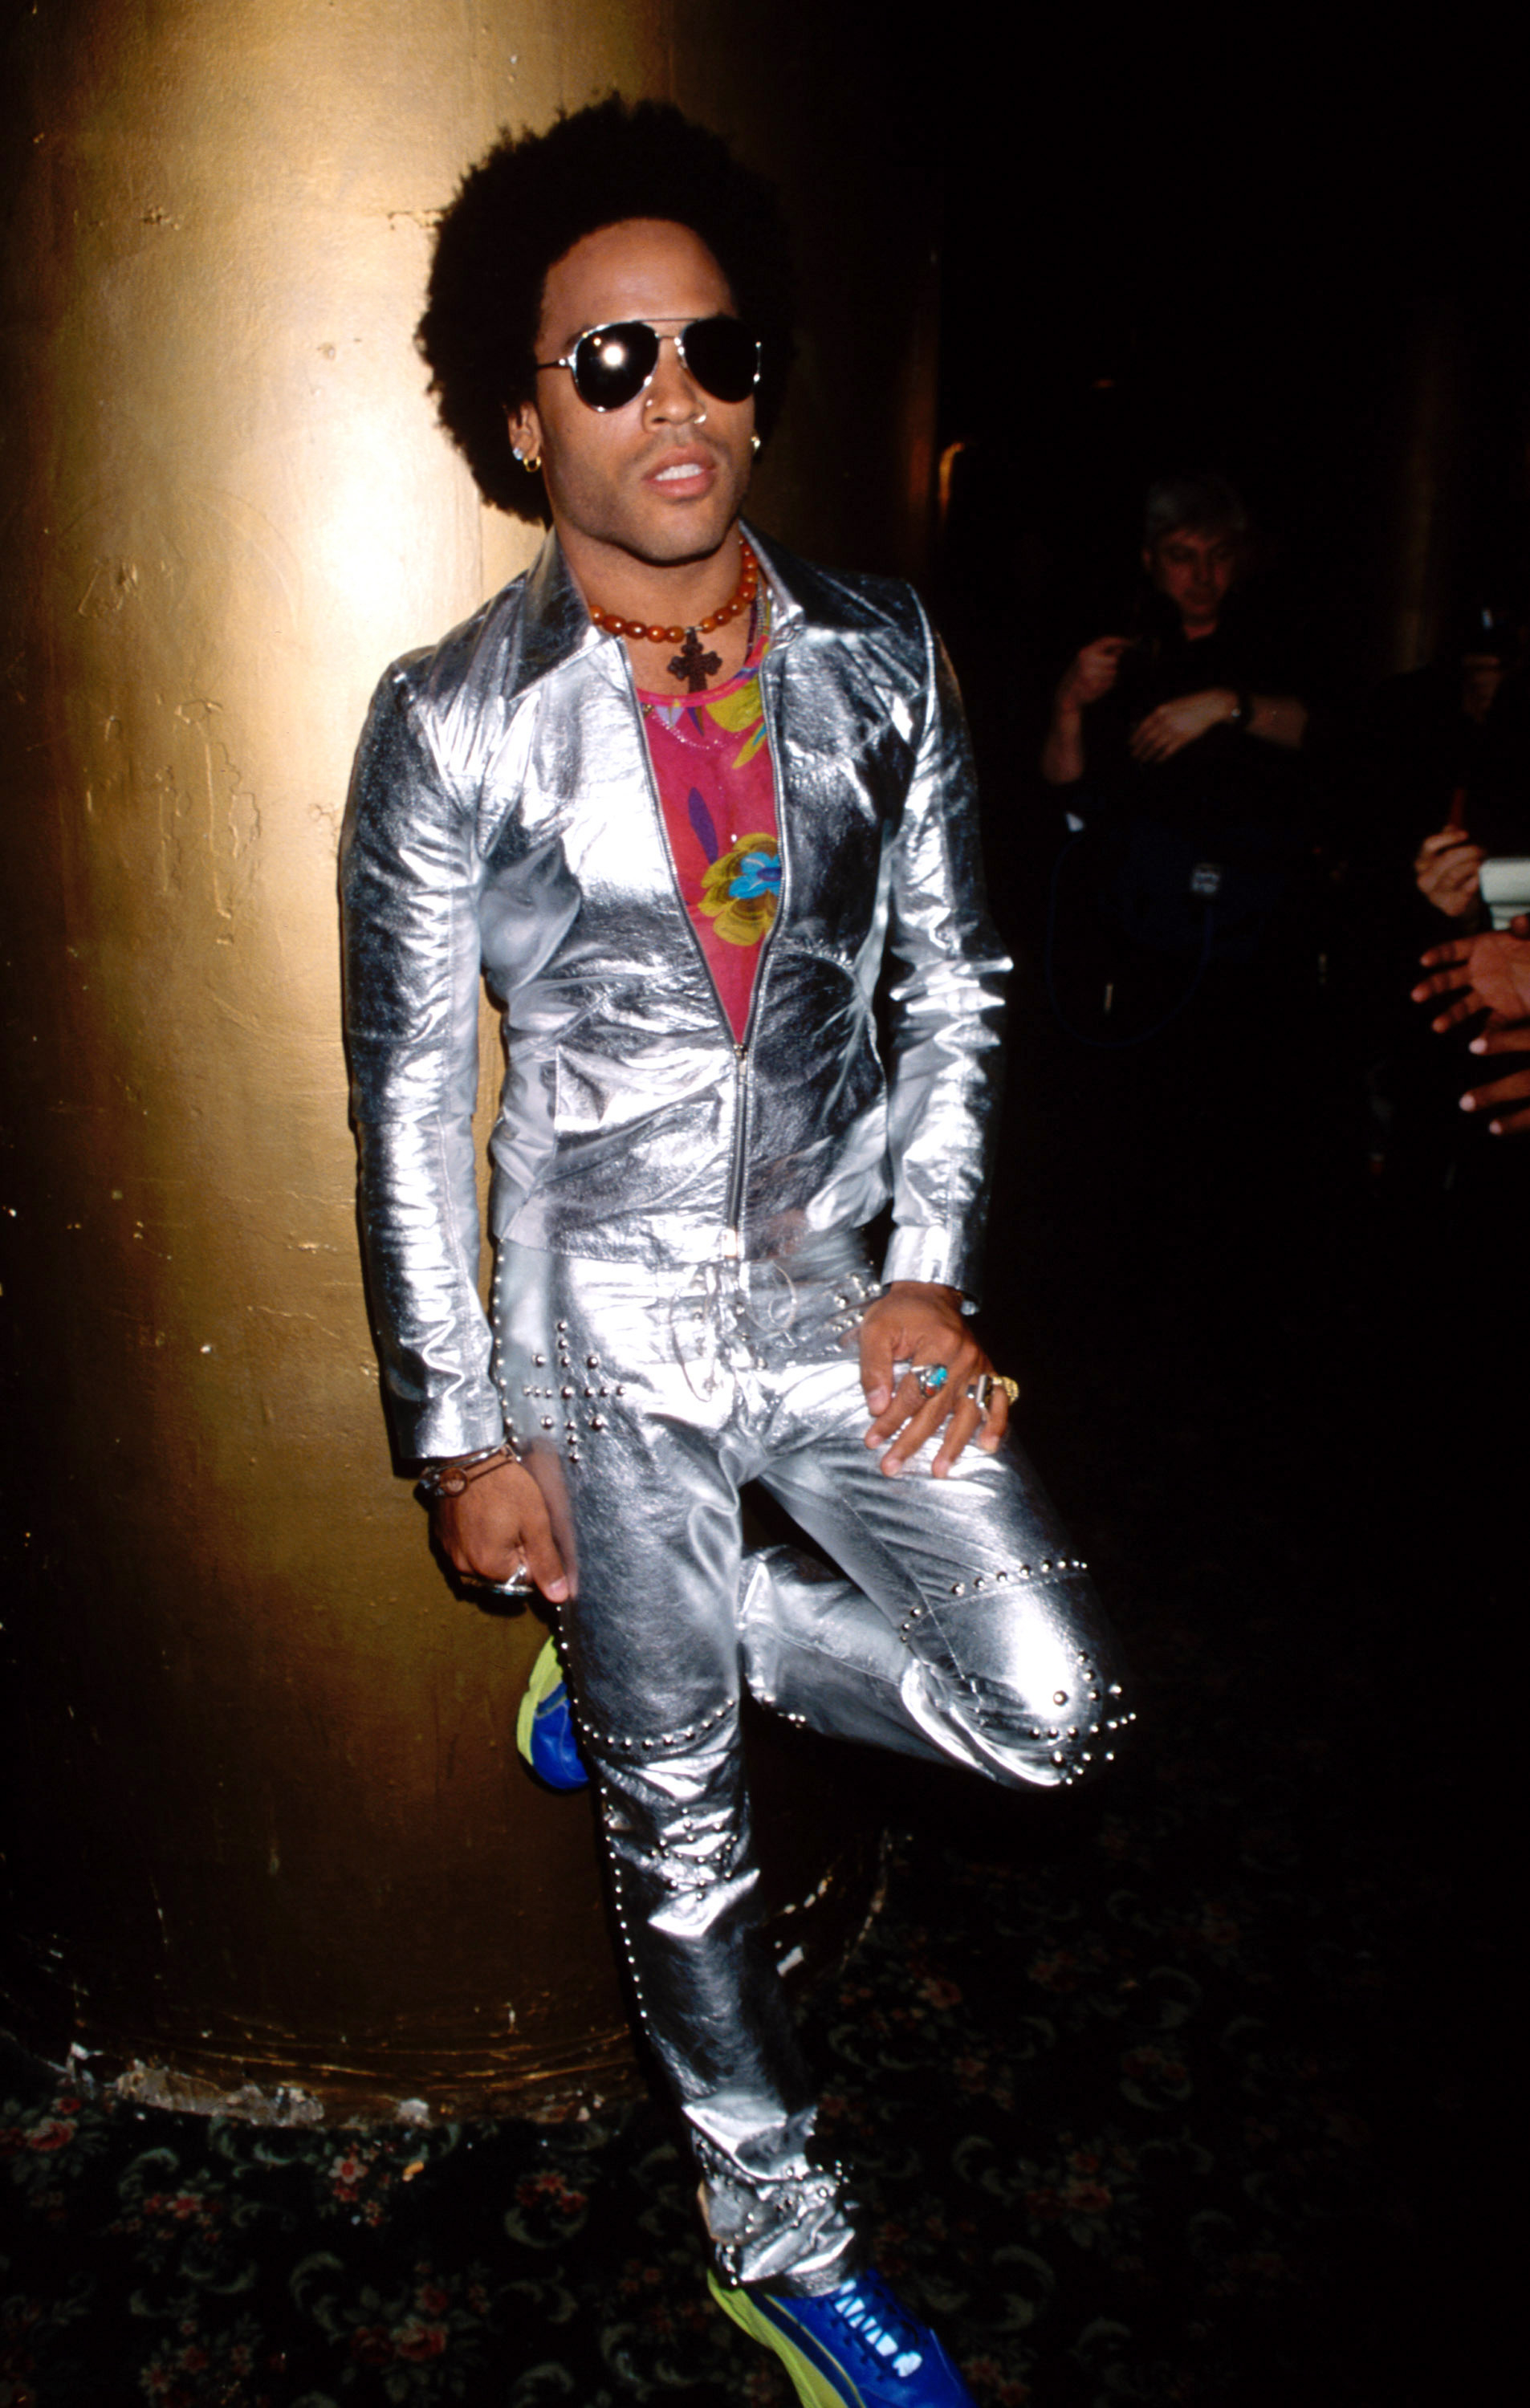 Person in a metallic suit with sneakers, accessorized with sunglasses and necklace